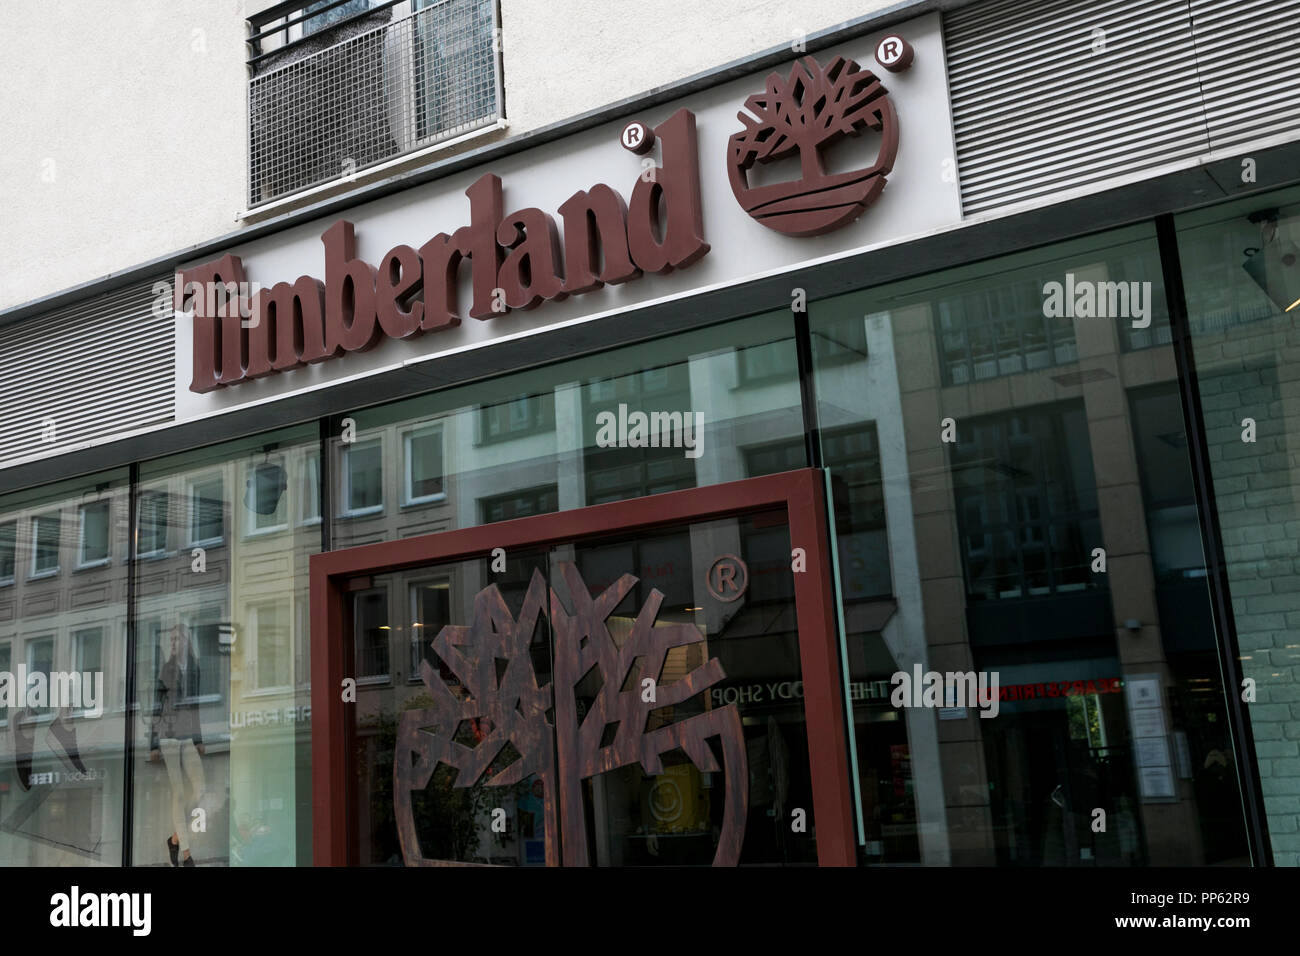 Timberland store hi-res stock photography and images - Alamy